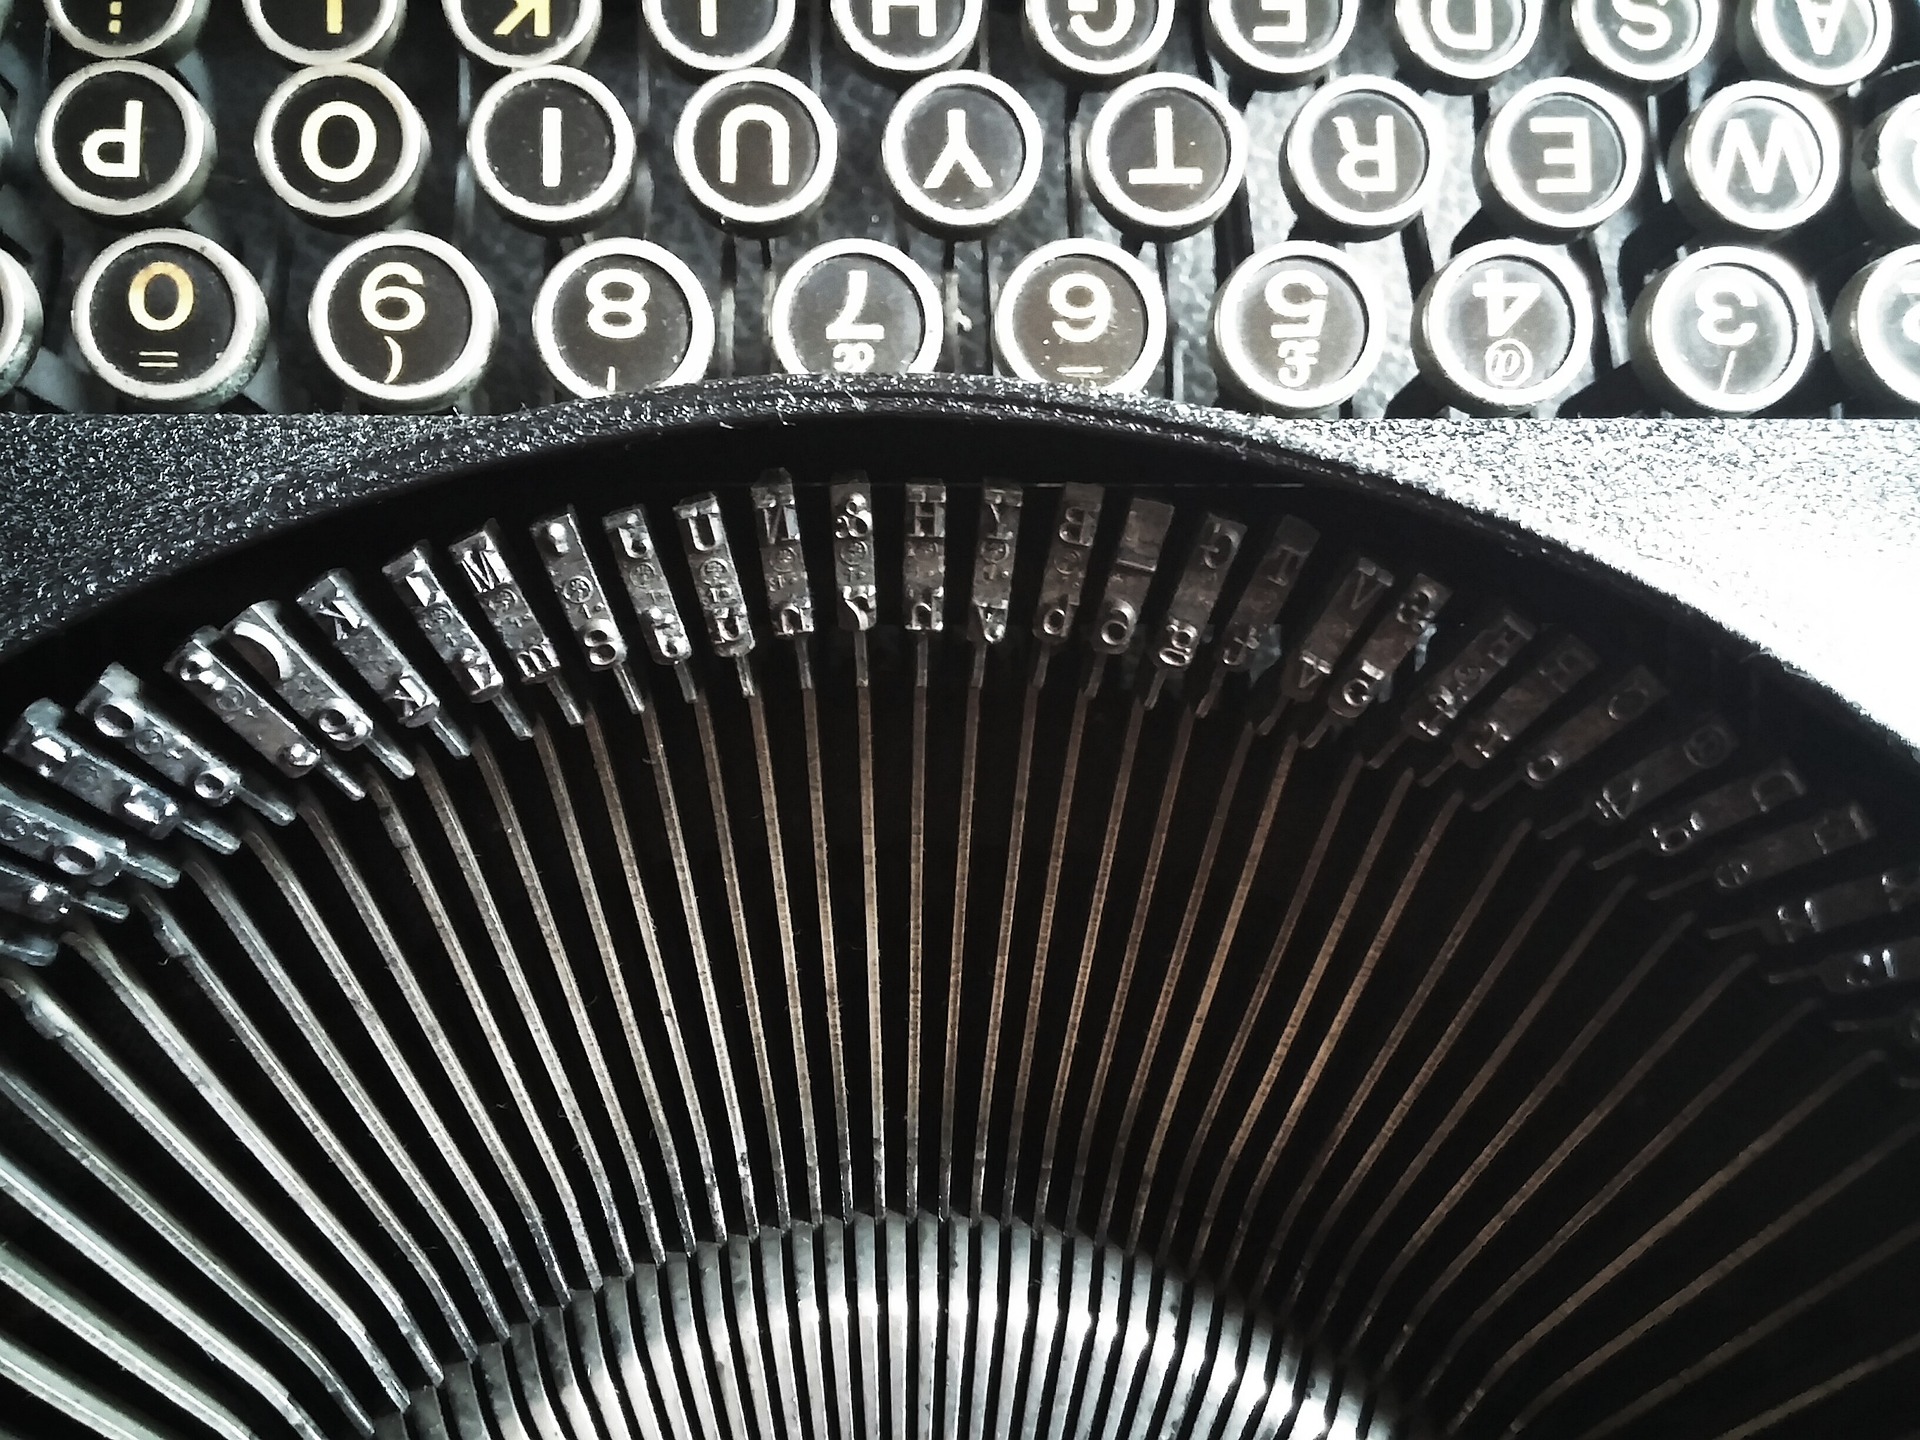 A closeup of the insides of a typewriter with keys arranged in an array across the photograph laterally